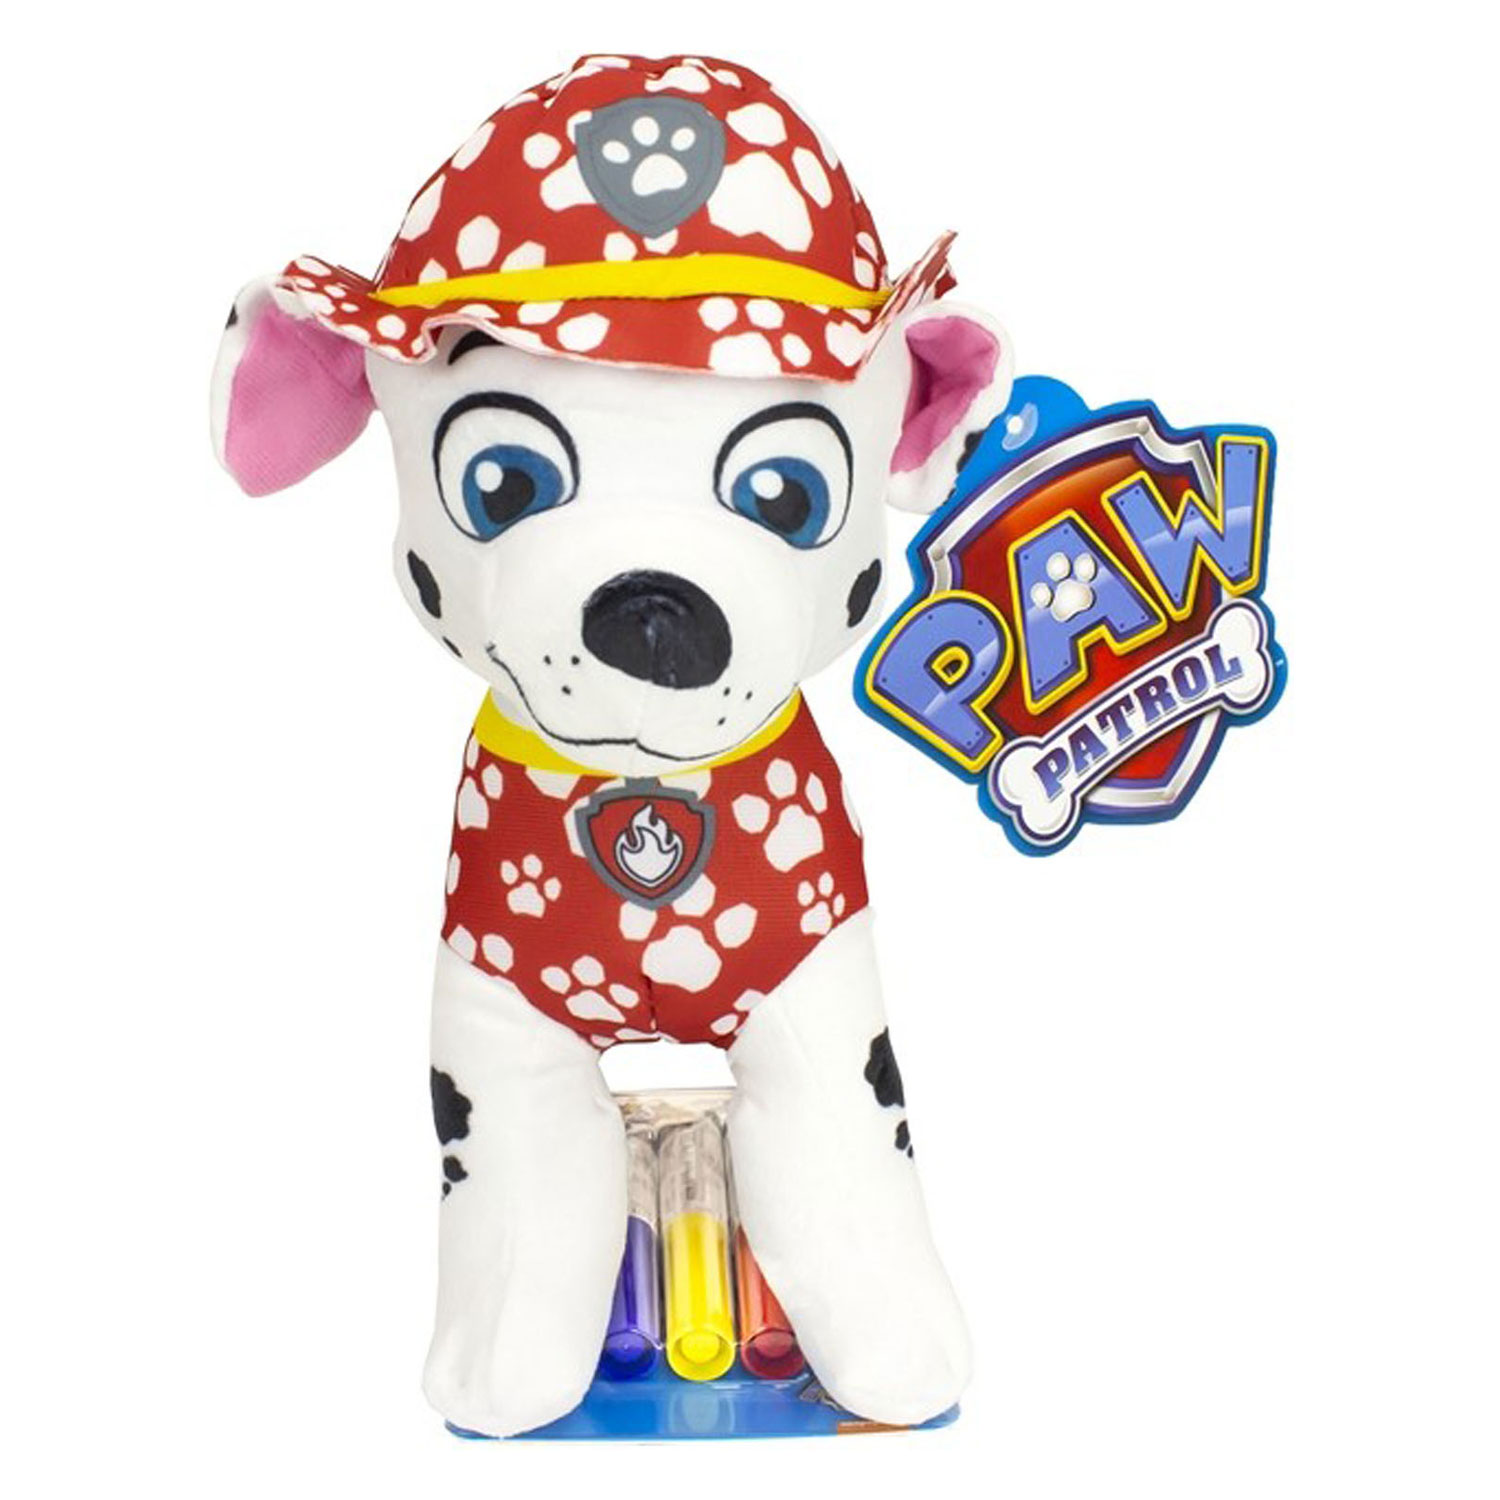 PAW Patrol Coloring Plush Toy with Markers - Marshall